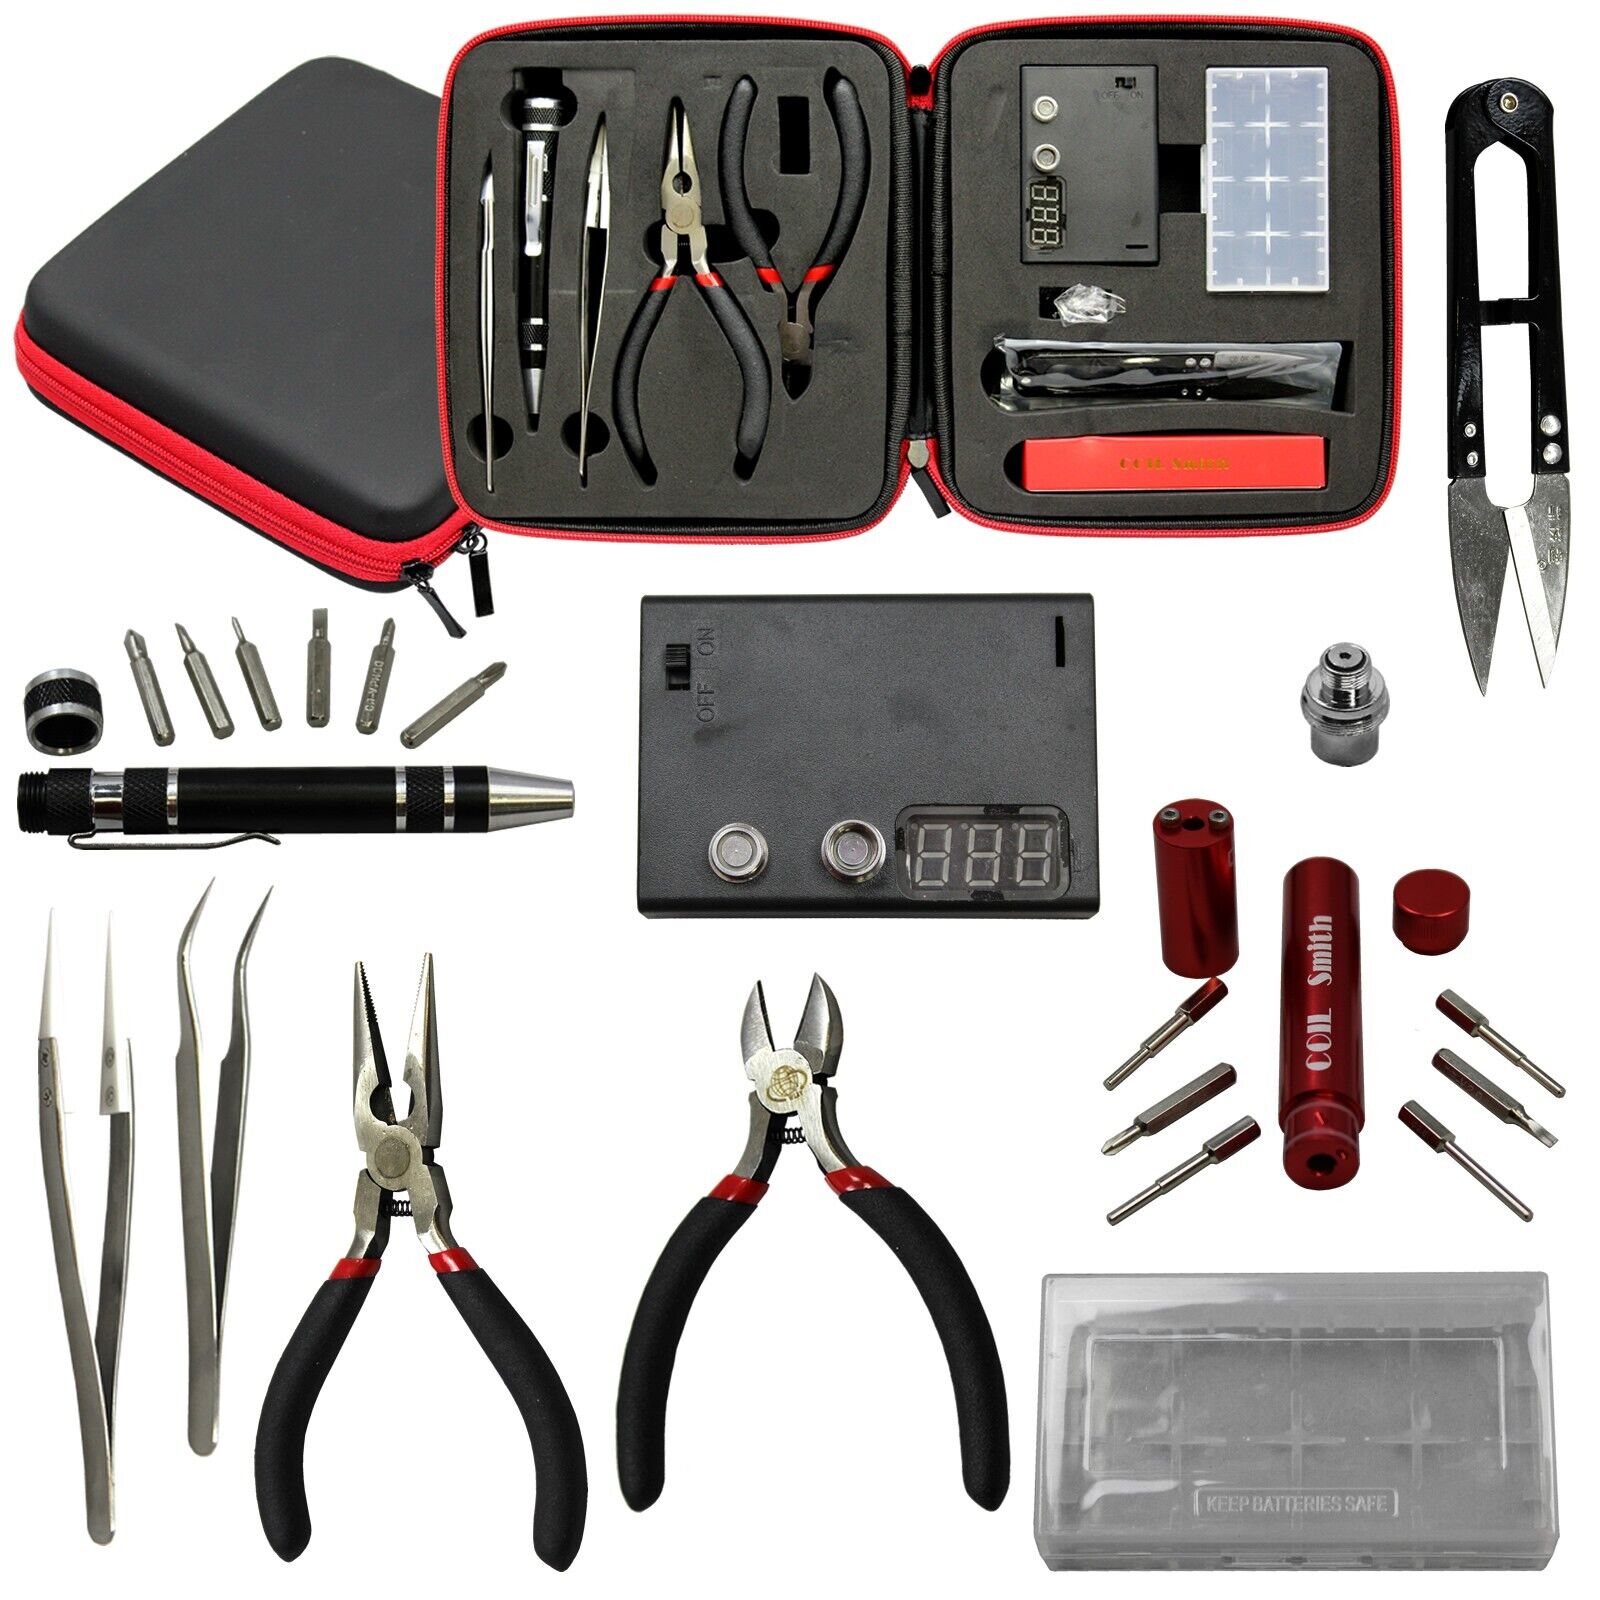 Coil Smith Master Tool Kit for Coil Making, Ohm Meter, Pliers, Custom Case, DIY